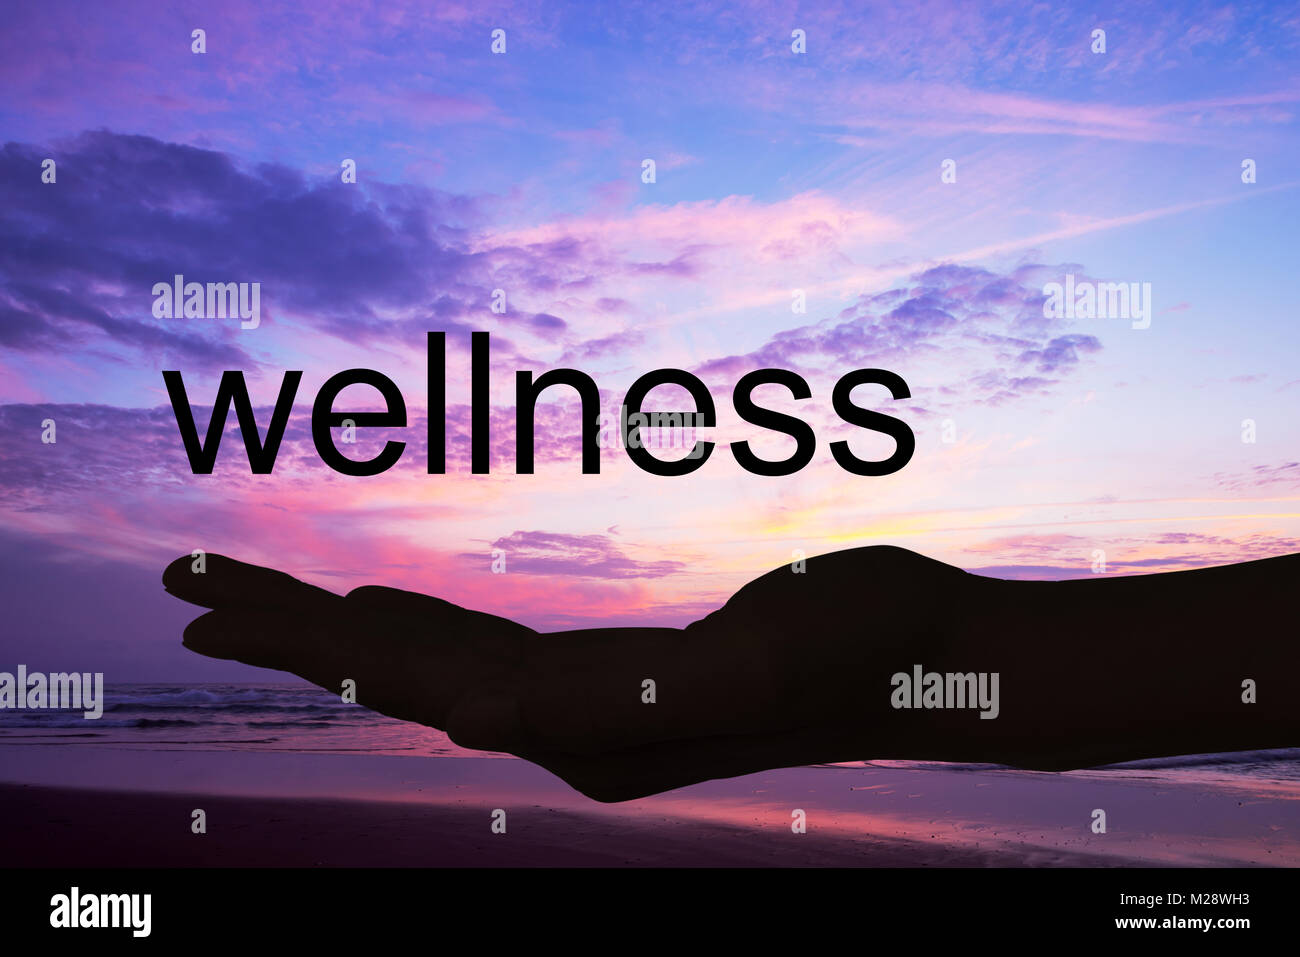 Hand offering the word wellness, sunset background Stock Photo